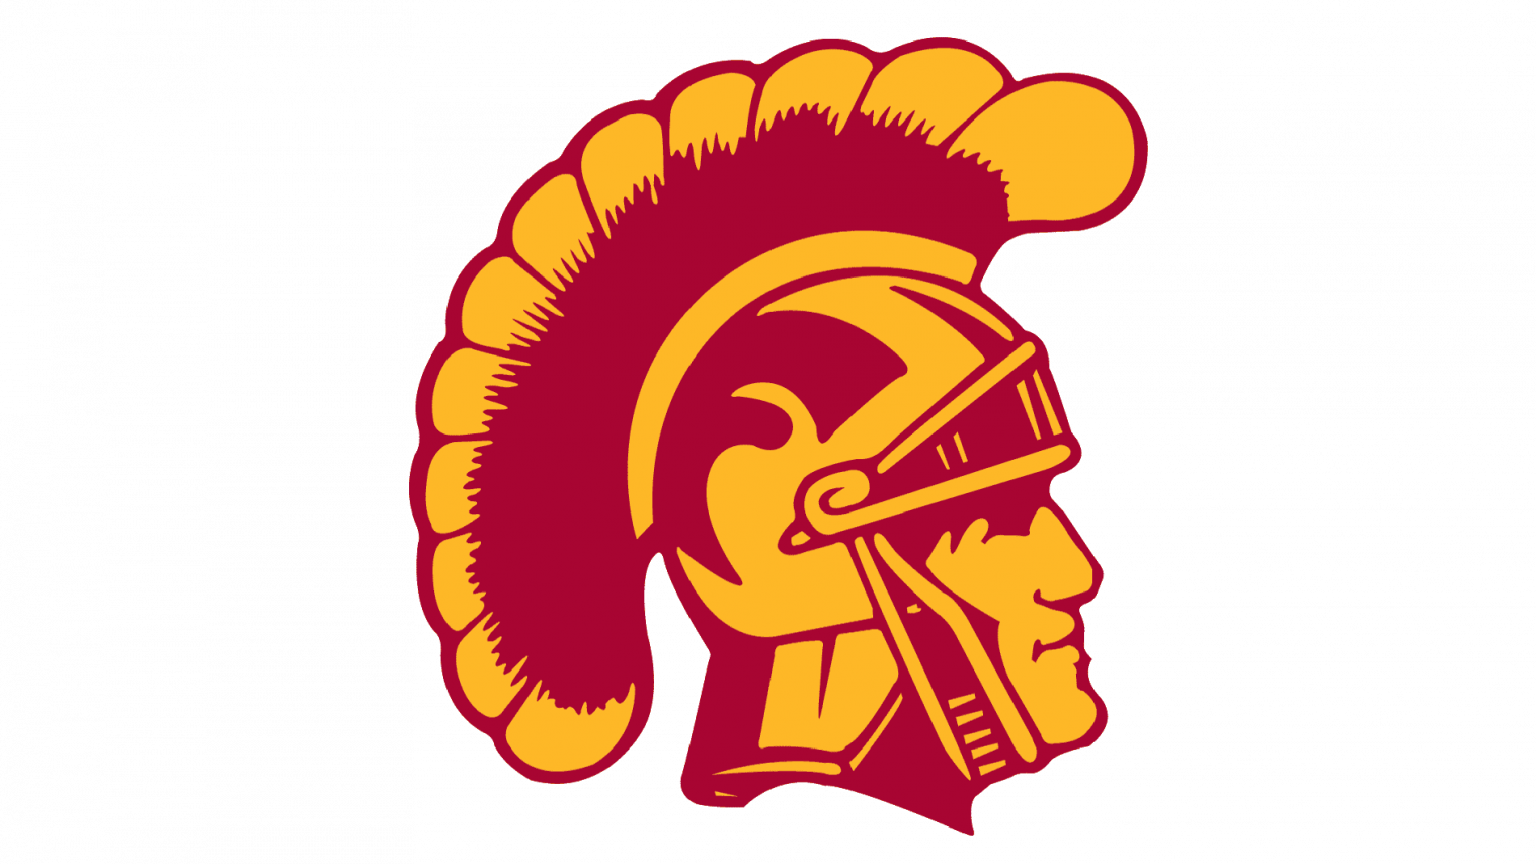 The very first Trojans logo was an emblem, and it featured